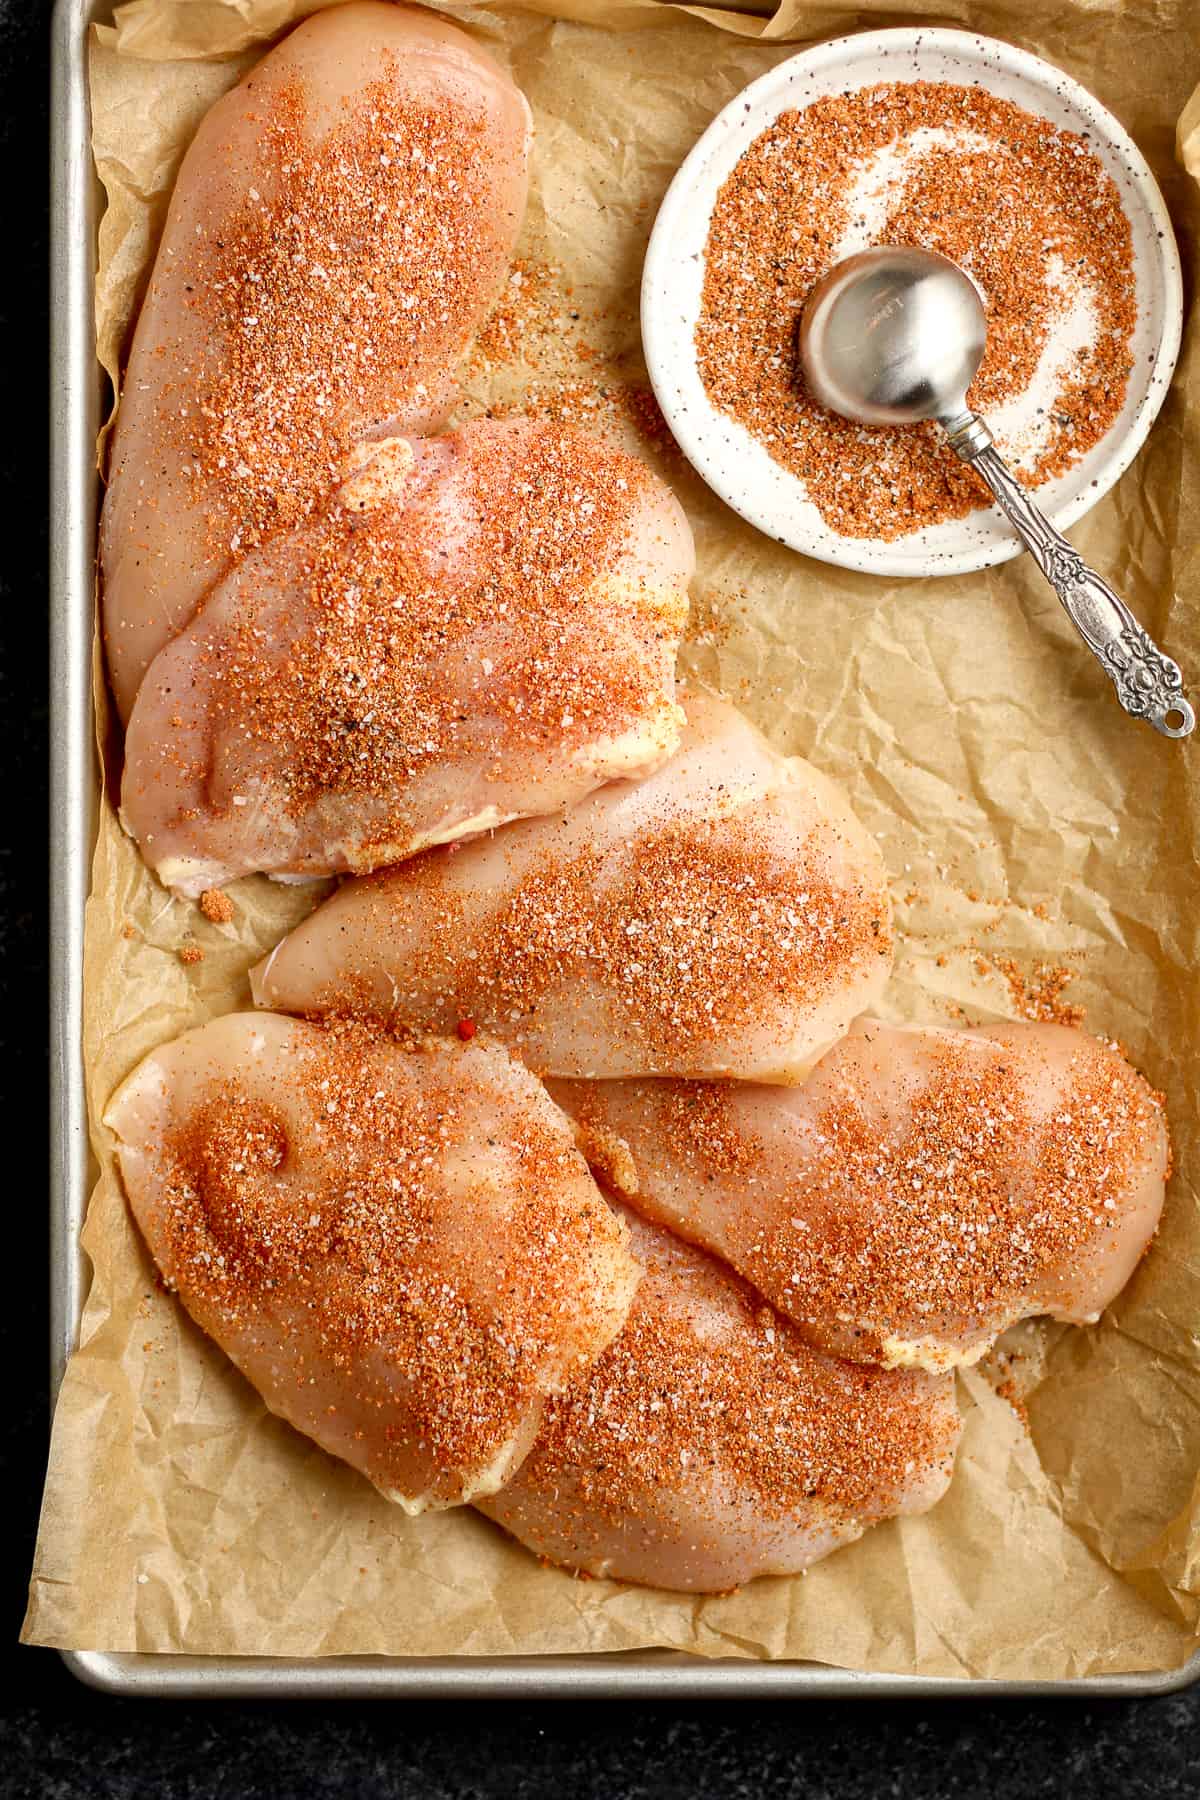 A pan of six raw chicken breasts with a small plate of seasoning.